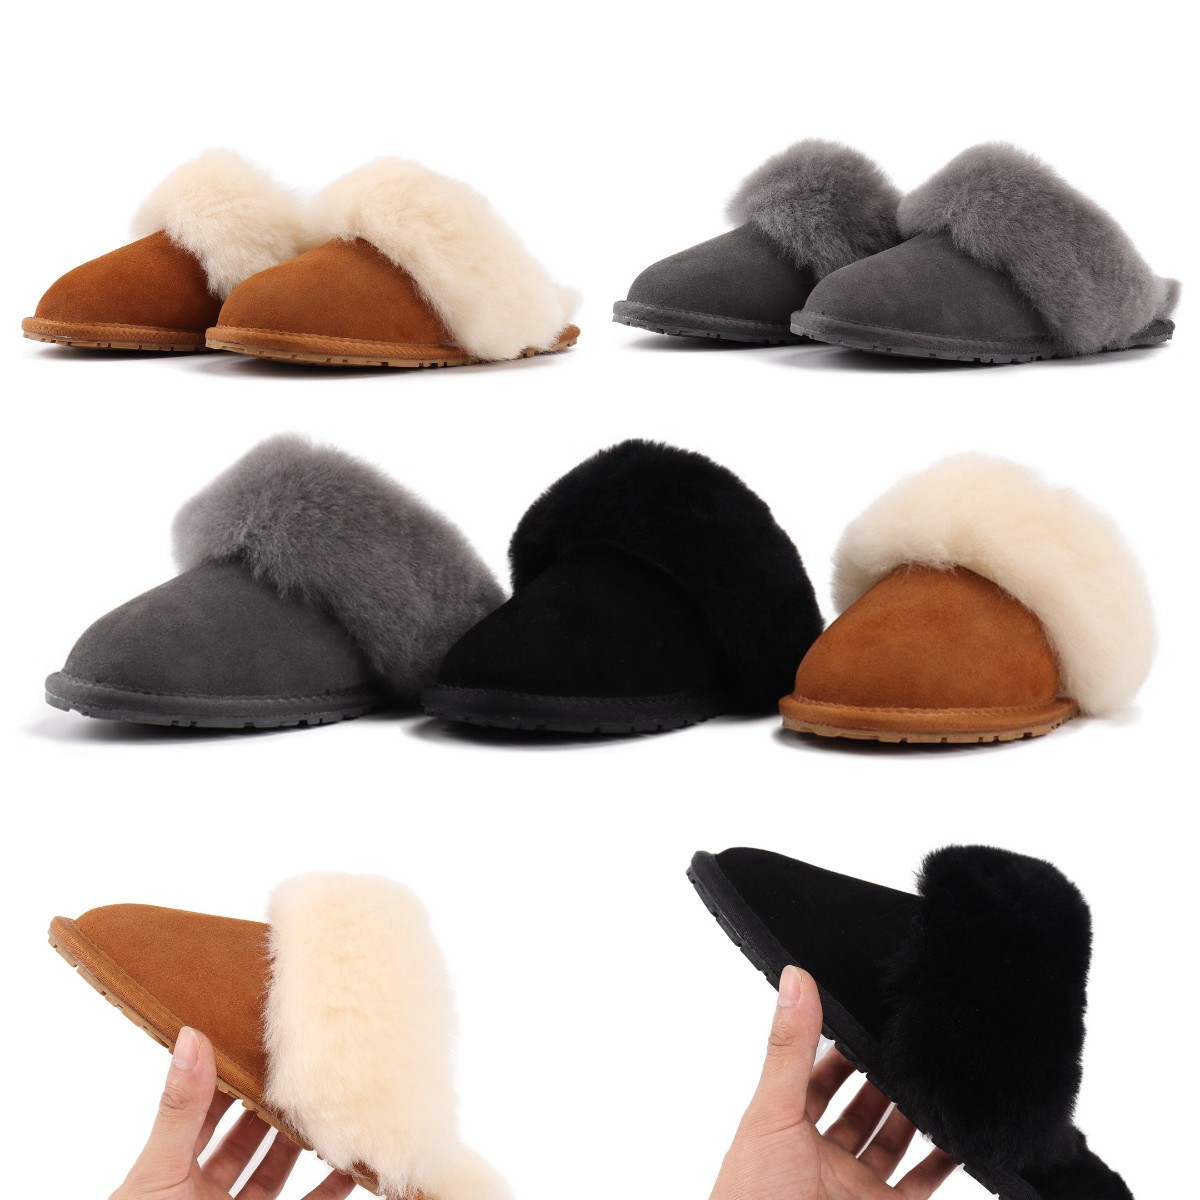 

Women men winter Shoes SCUFF SIS Suede Slide Slippers Shearling Plush Fur Sandal Slides Australia Slip On Mule Wool Booties Charcoal Chestnut Flats Lifestyle Warm, Fill postage